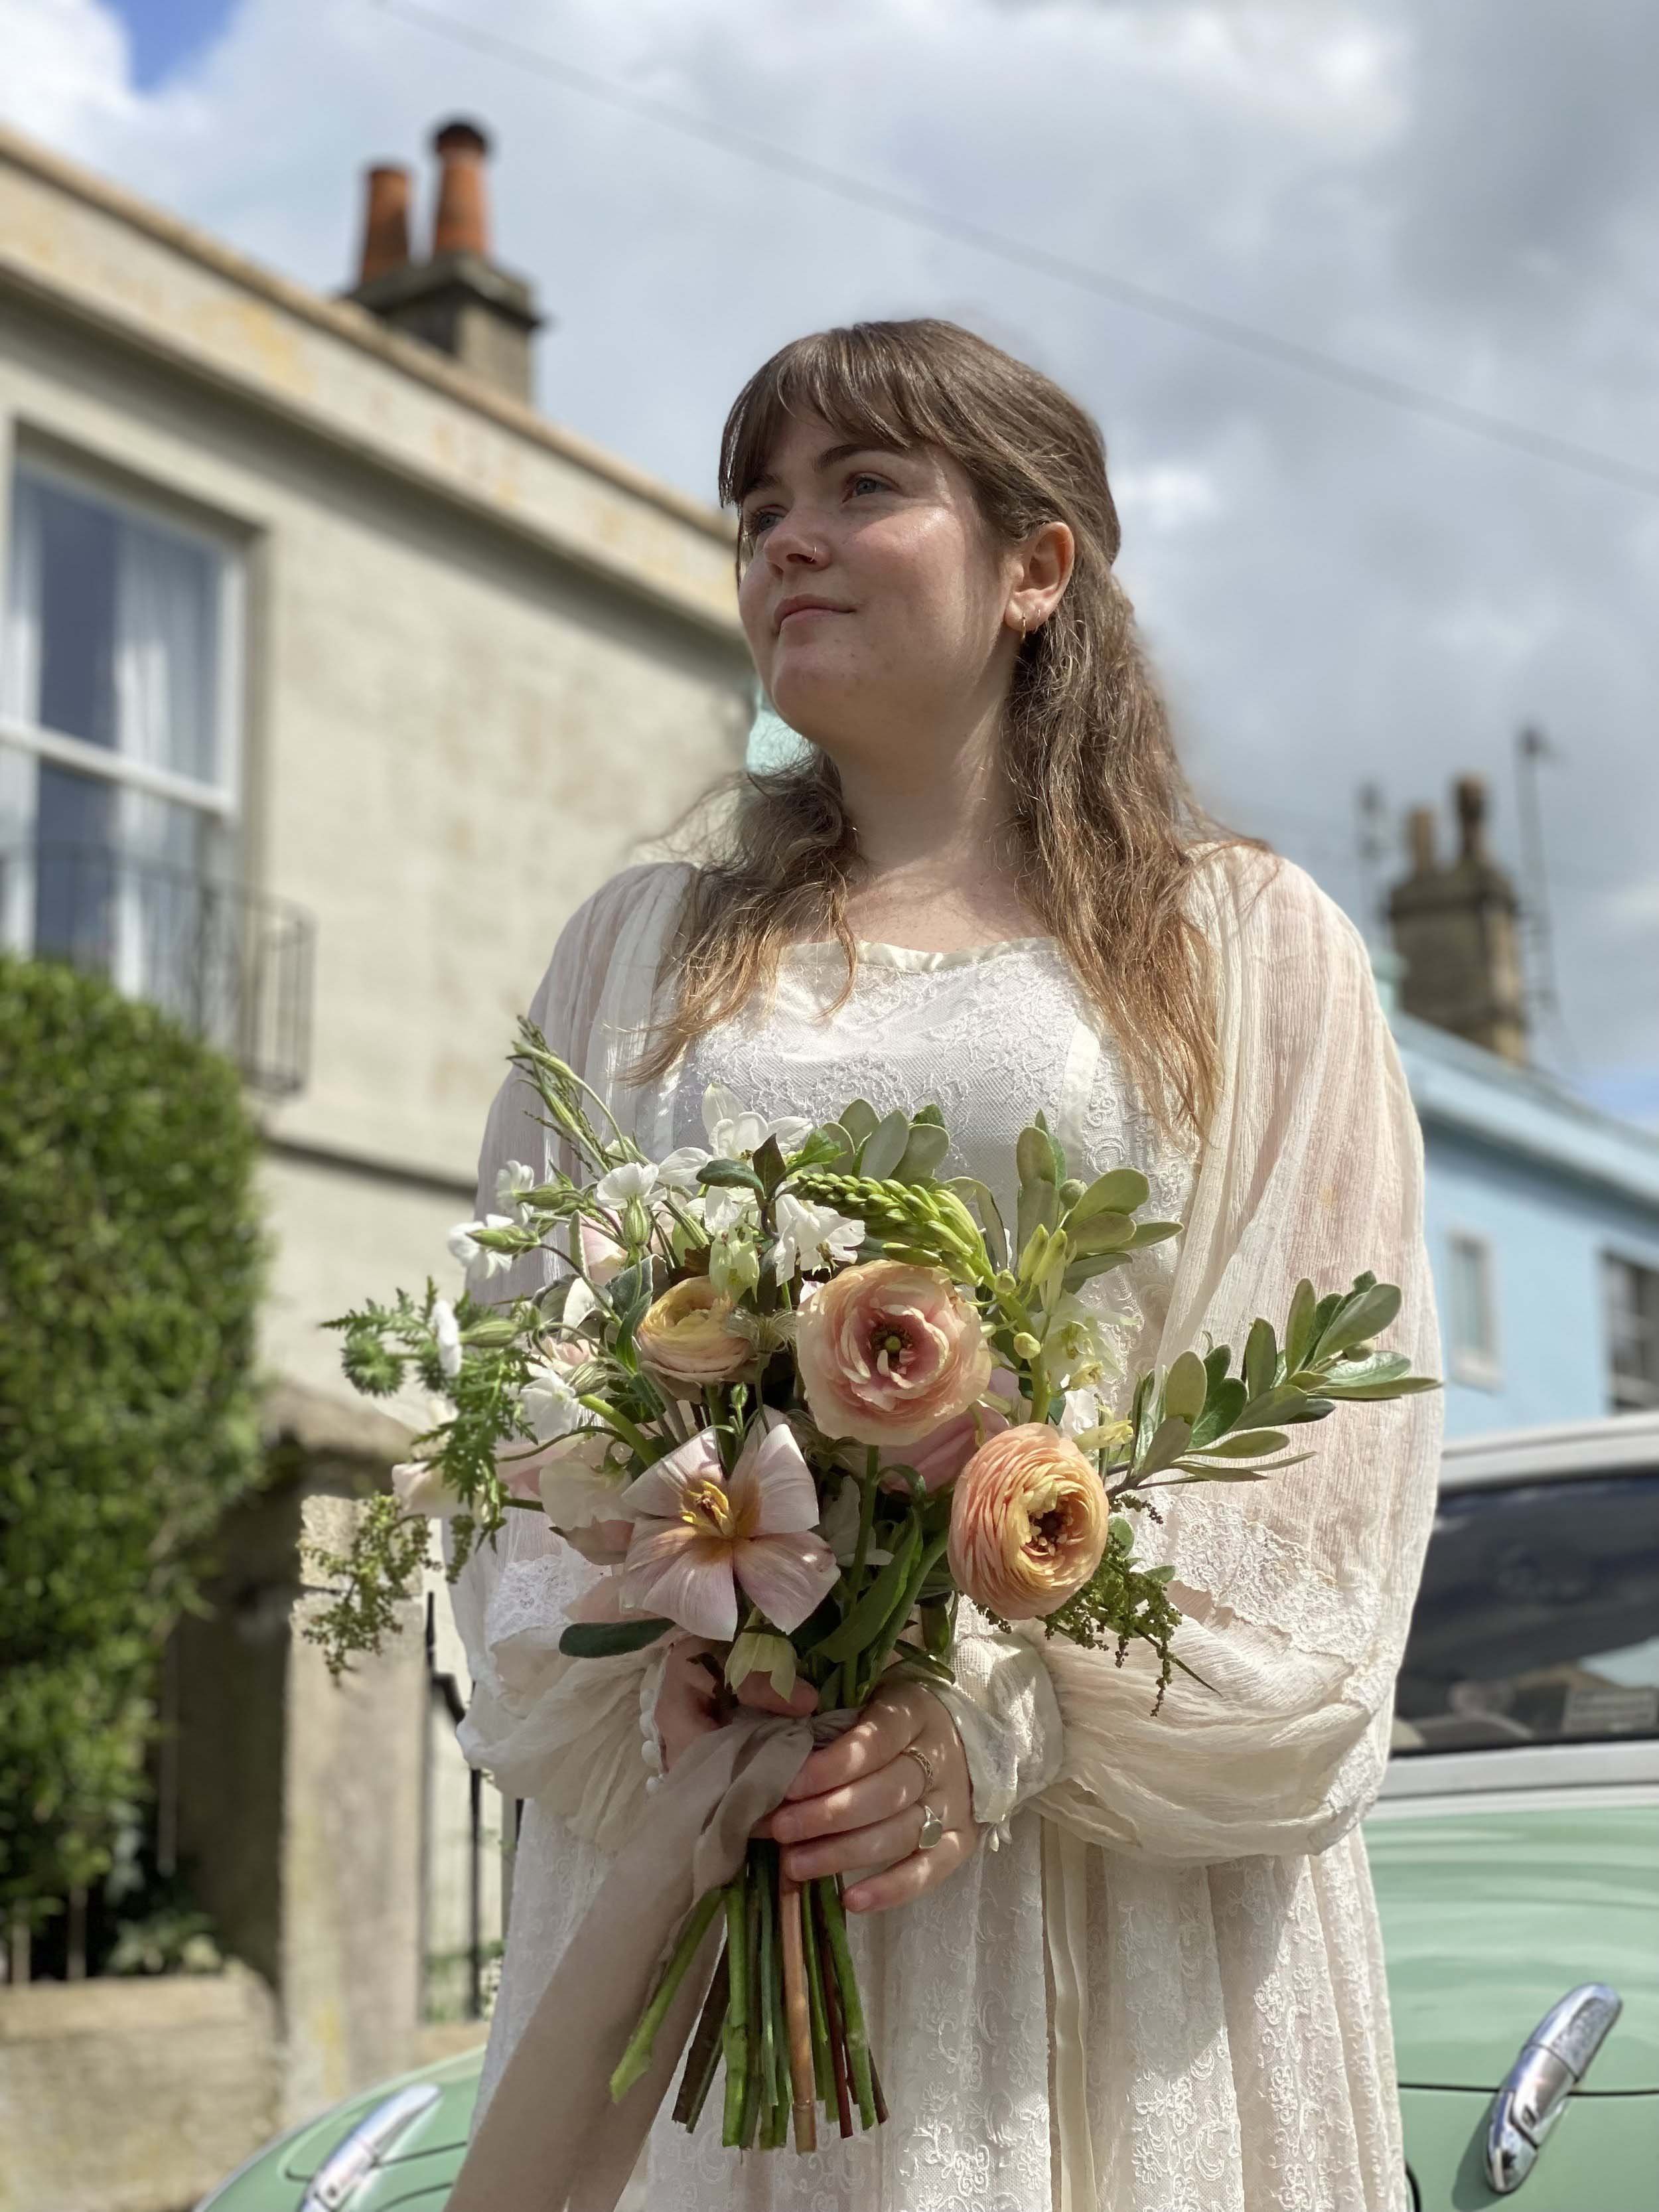 The Bath Flower School student holding her beautiful bridal bouquet in front of candy coloured houses